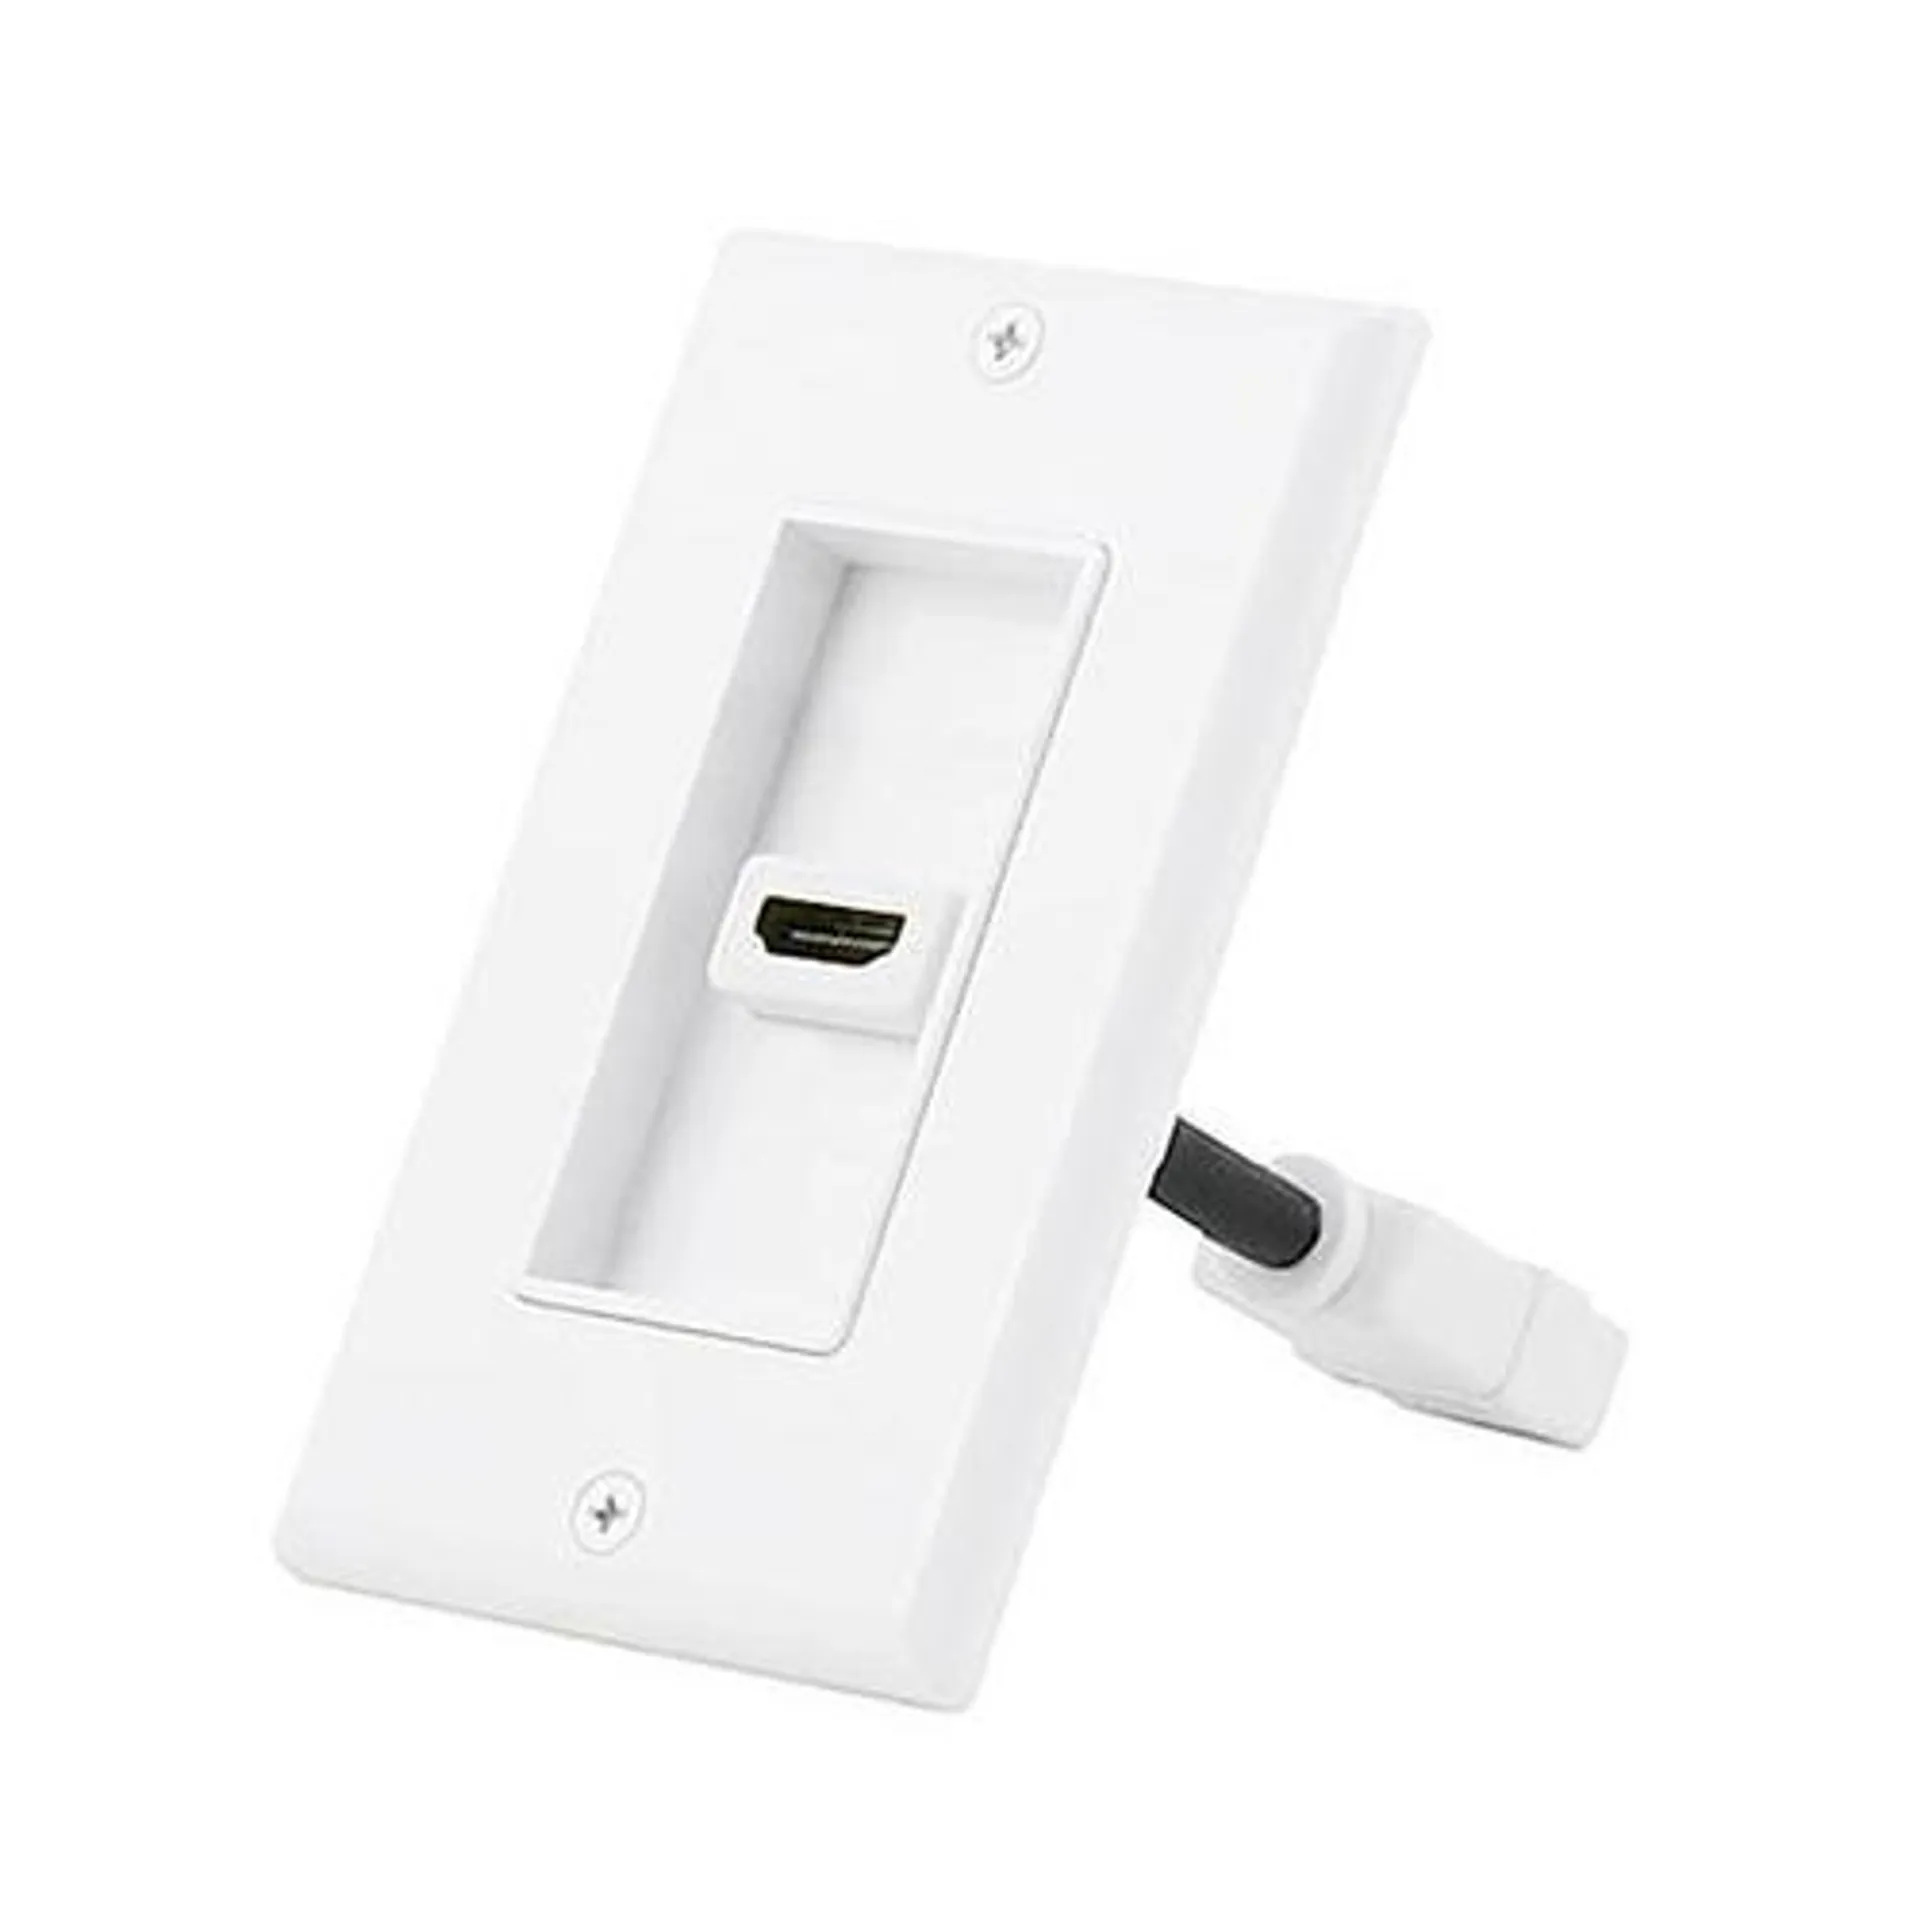 2-Piece Inset HDMI Wall Plate with 4 Inch Built-in Flexible HDMI Extension, White - PrimeCables®